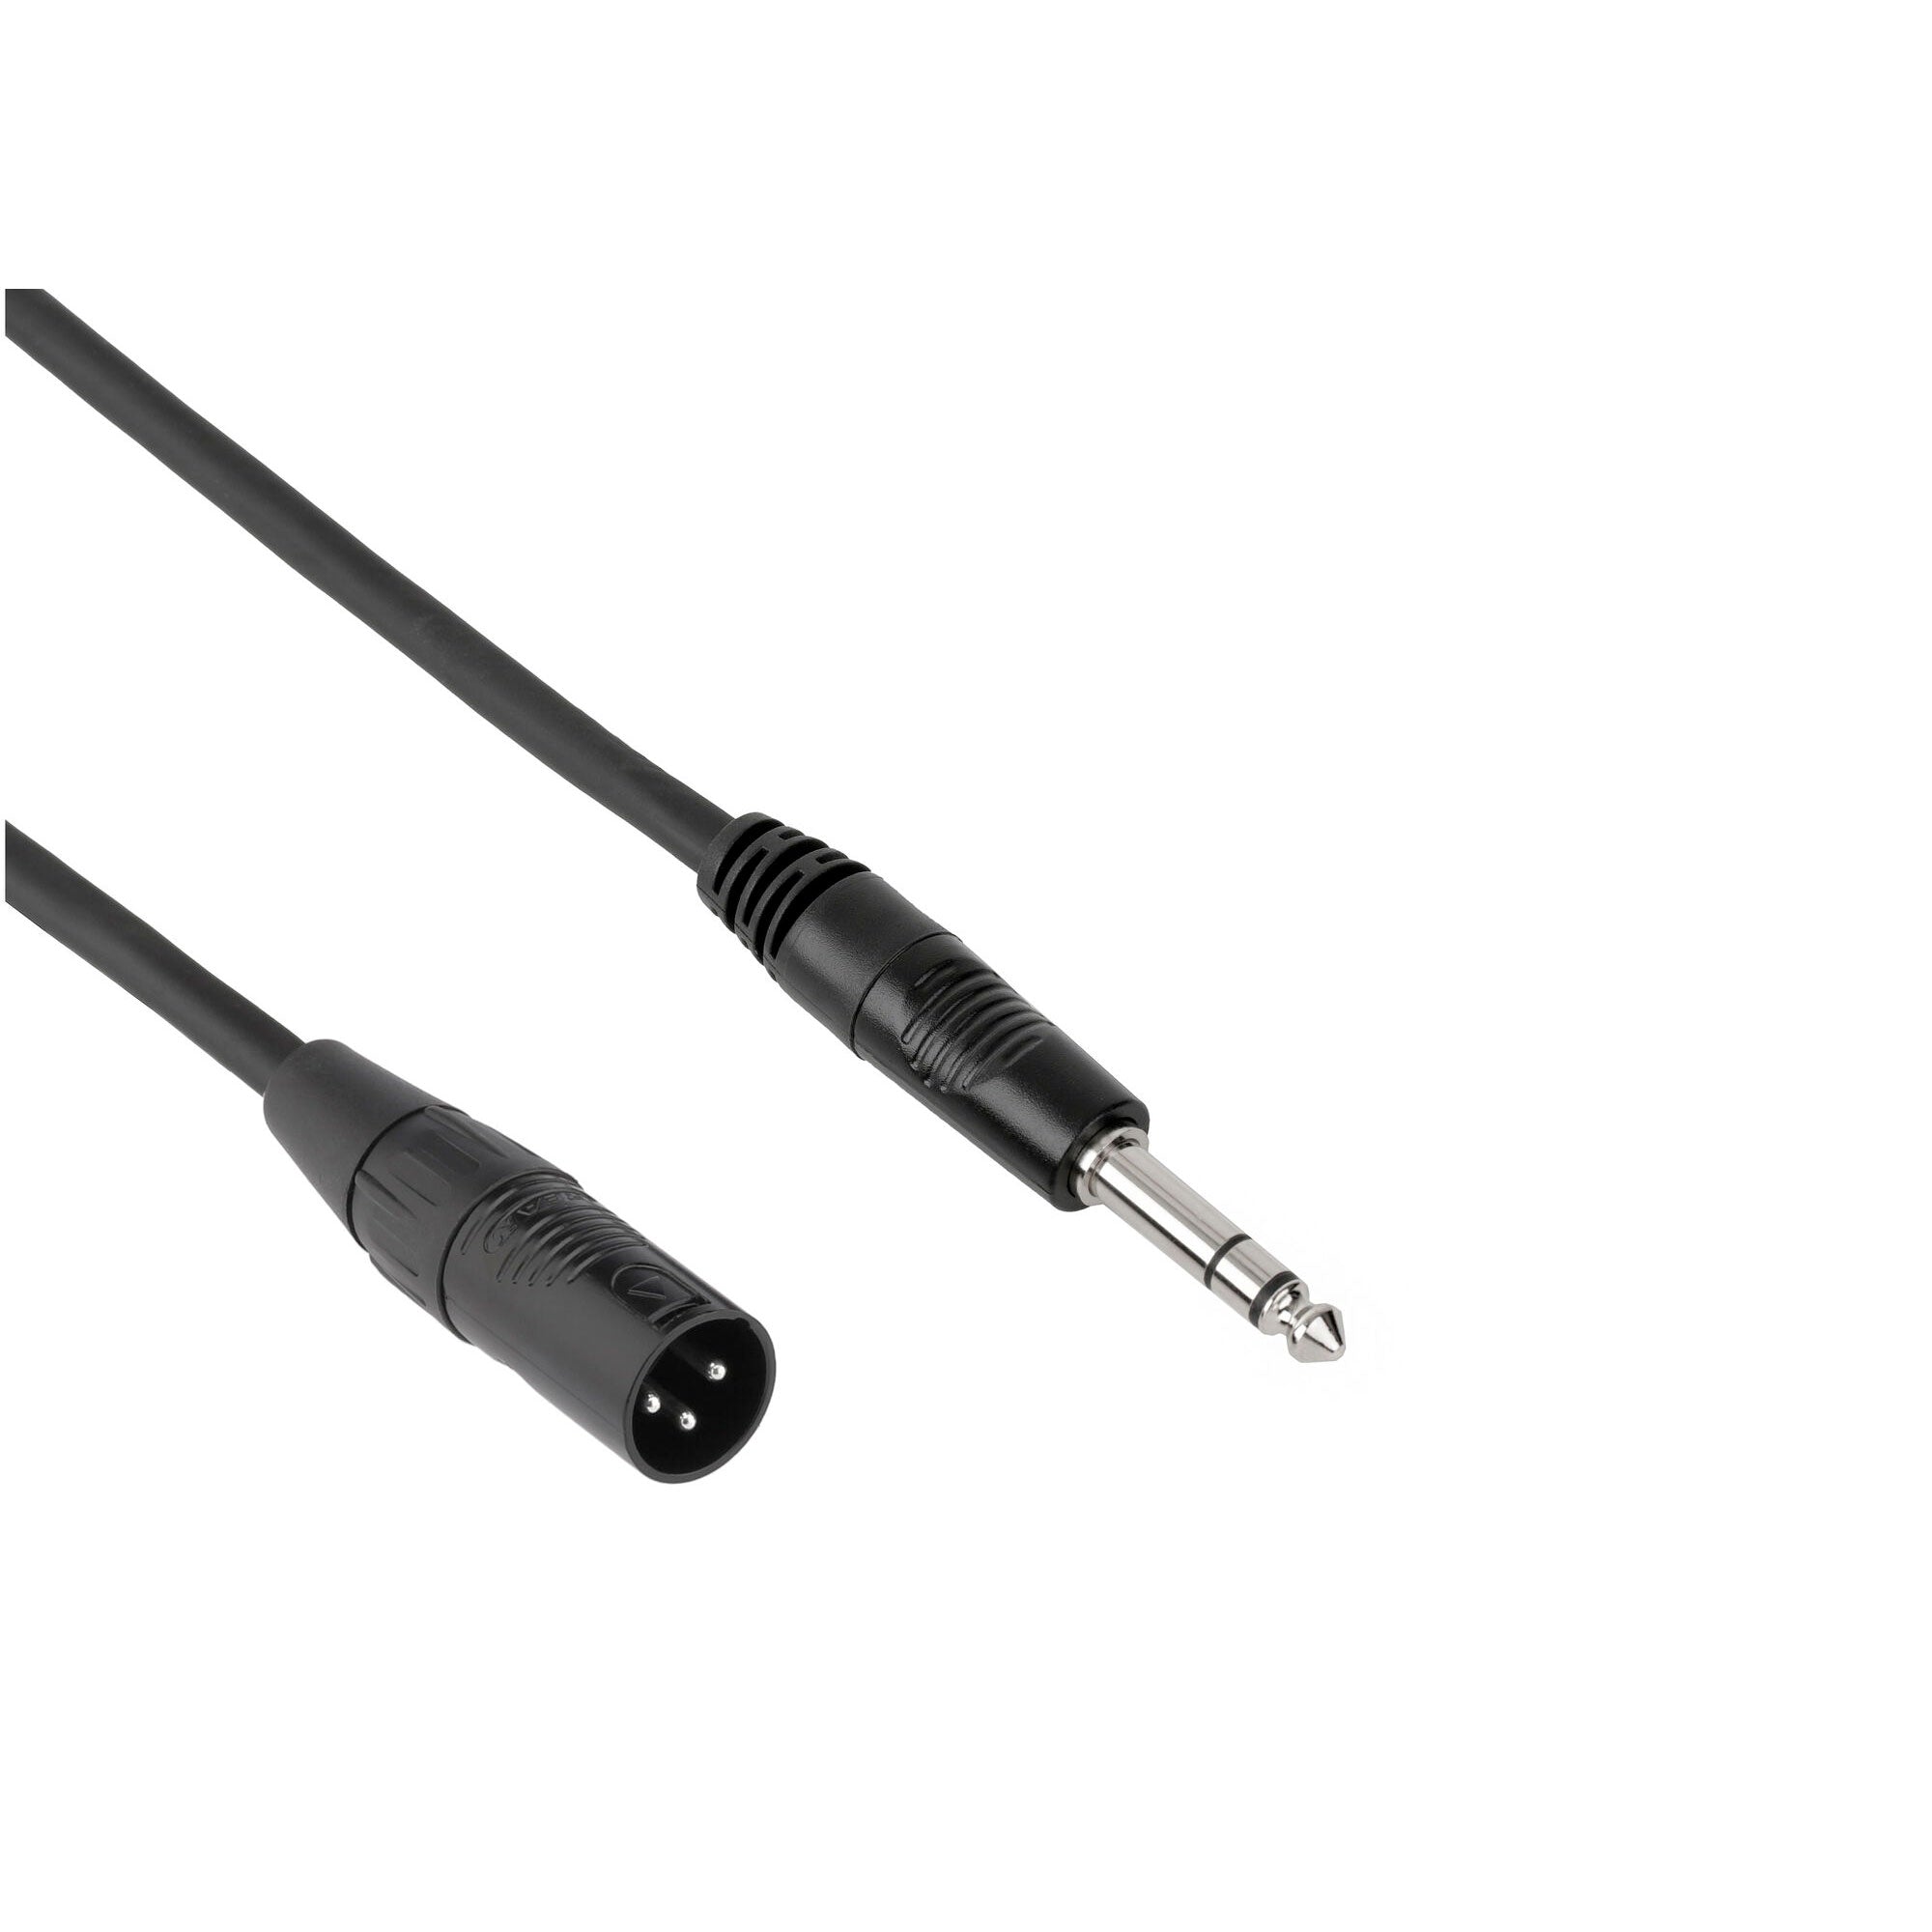 Kirlin Microphone Cable 2M 20AWG XLR M-M Stereo Jack Black